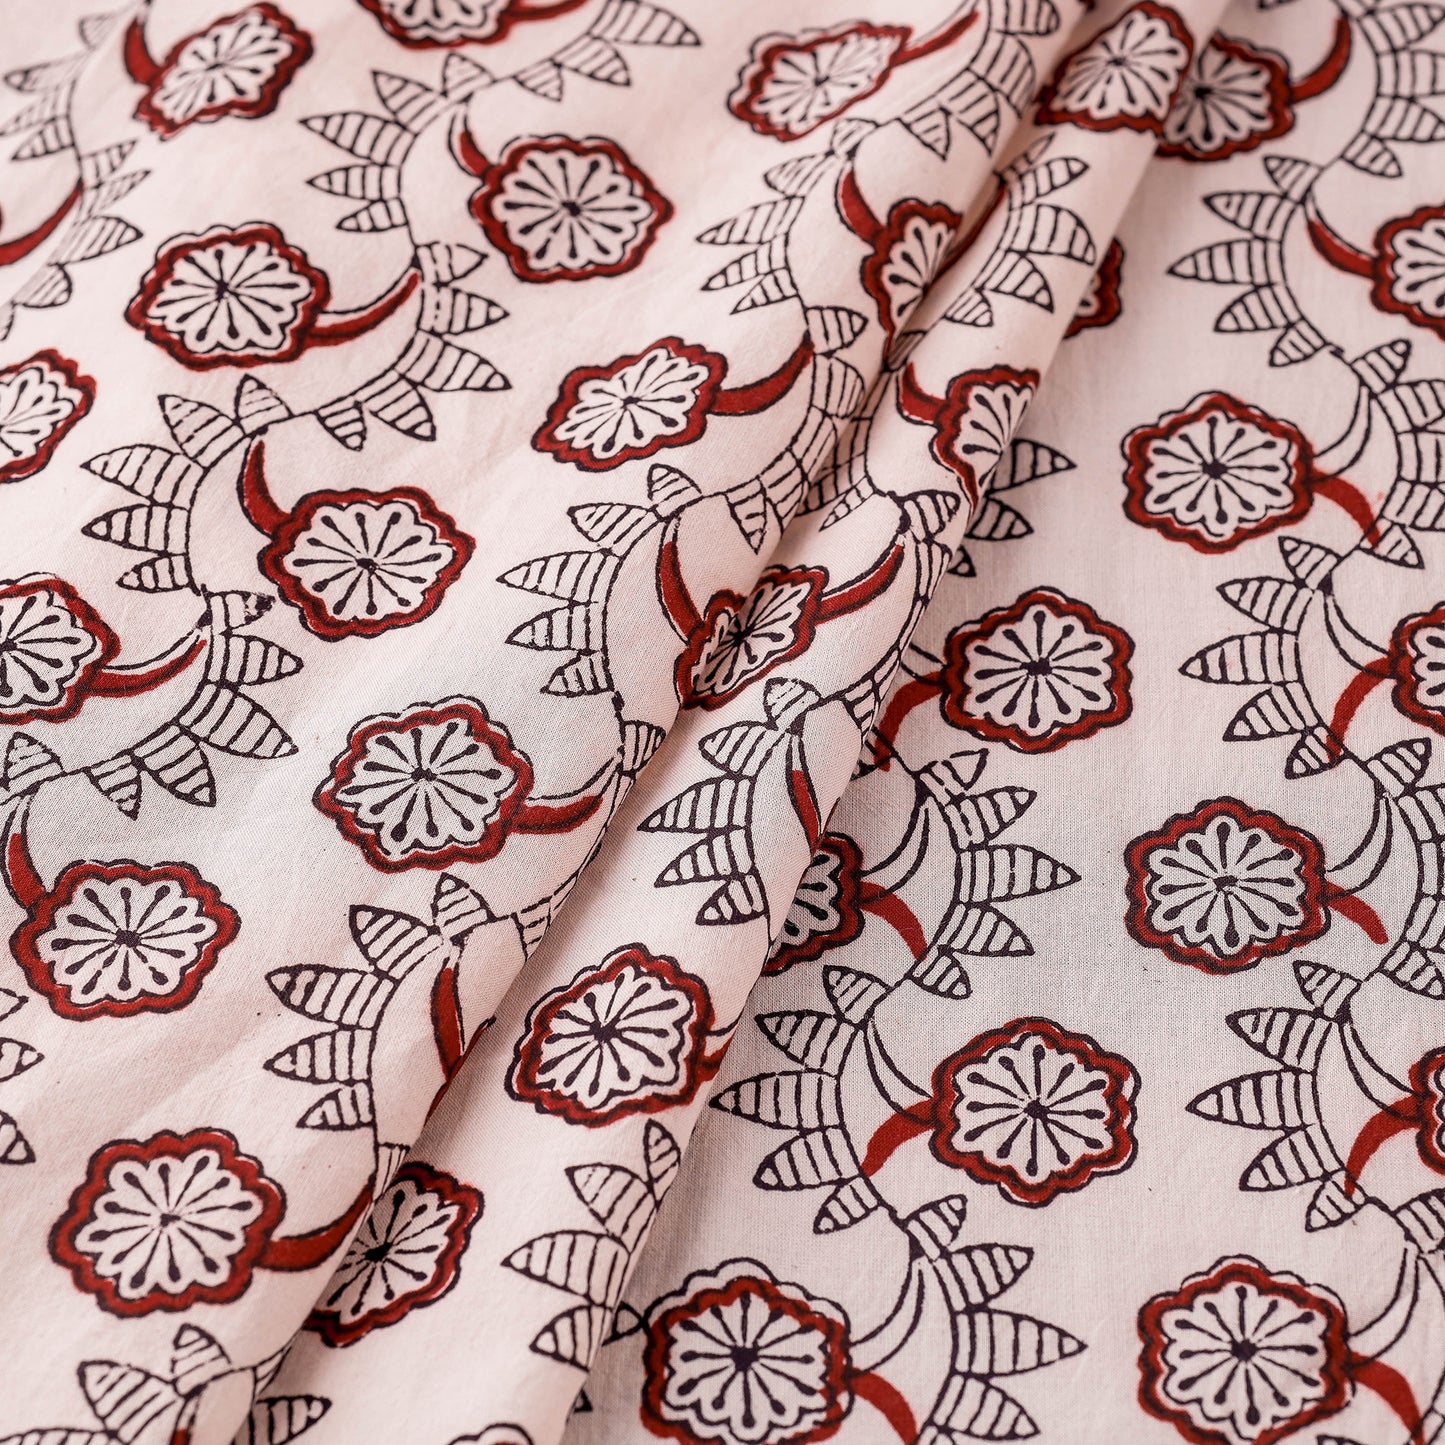 White - Bagh Block Printed Natural Dyed Cotton Fabric